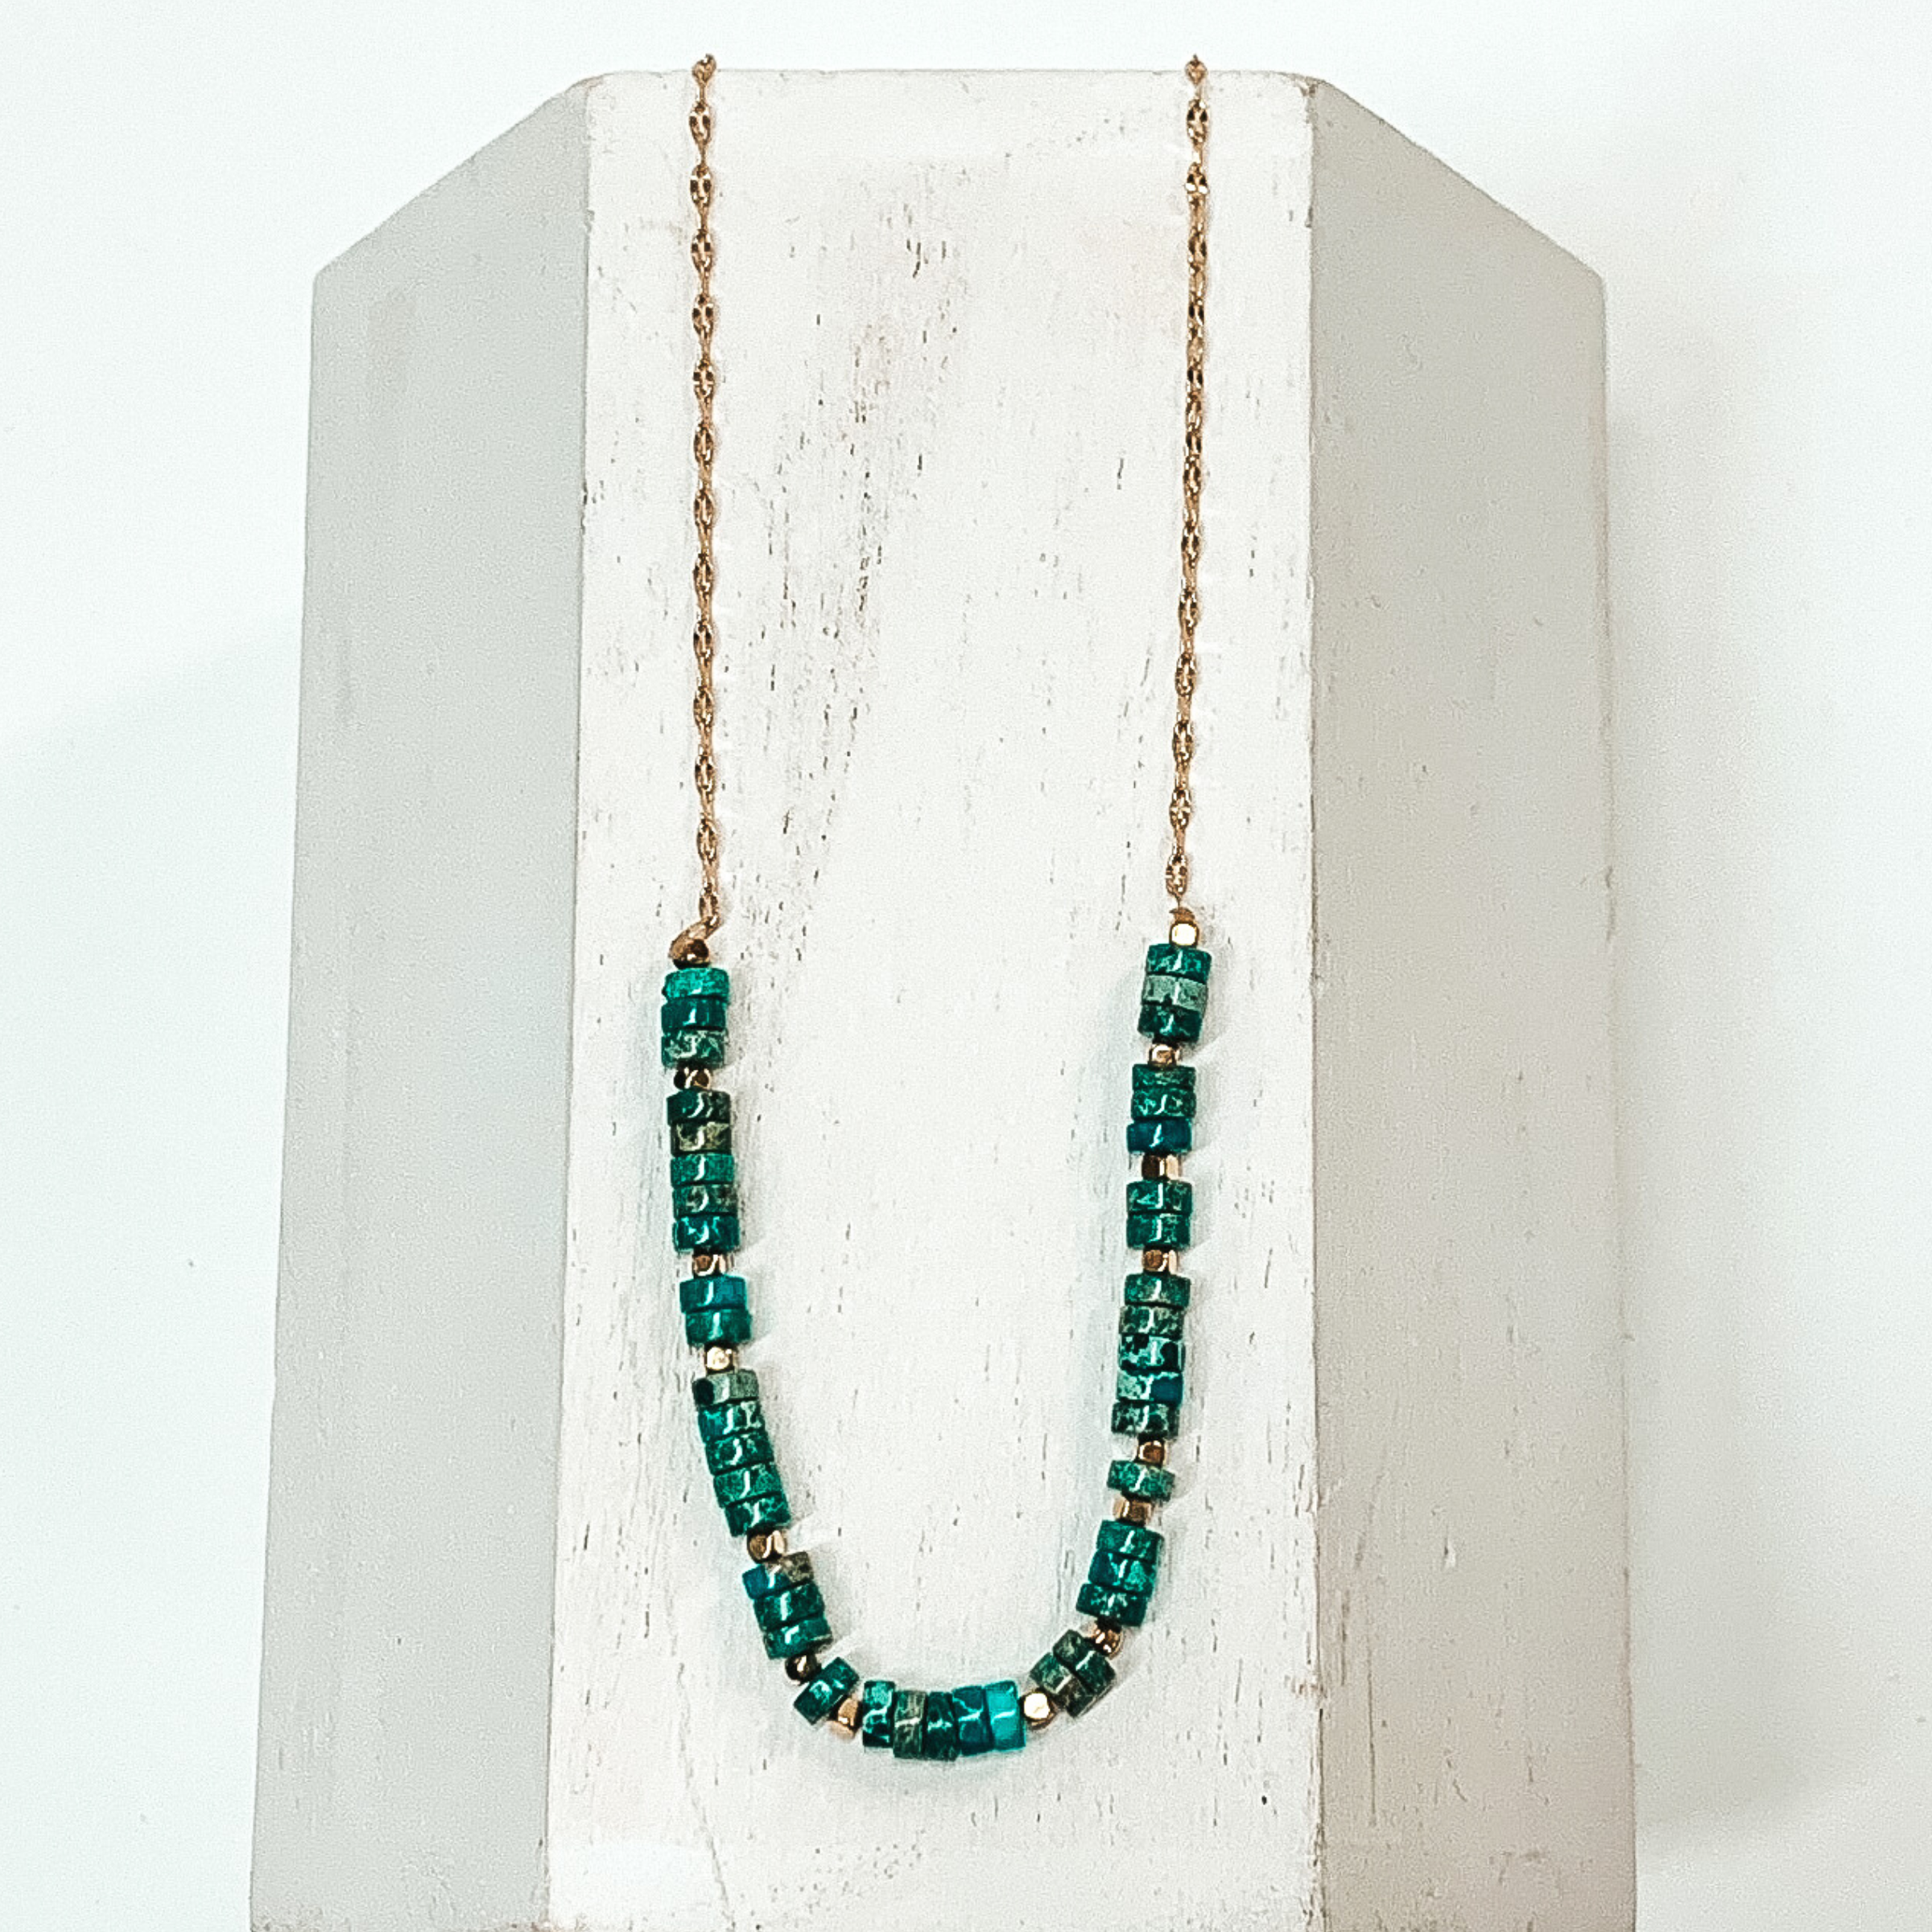 Gold Chain Necklace with Pipestone Inspired Segment in Turquoise - Giddy Up Glamour Boutique